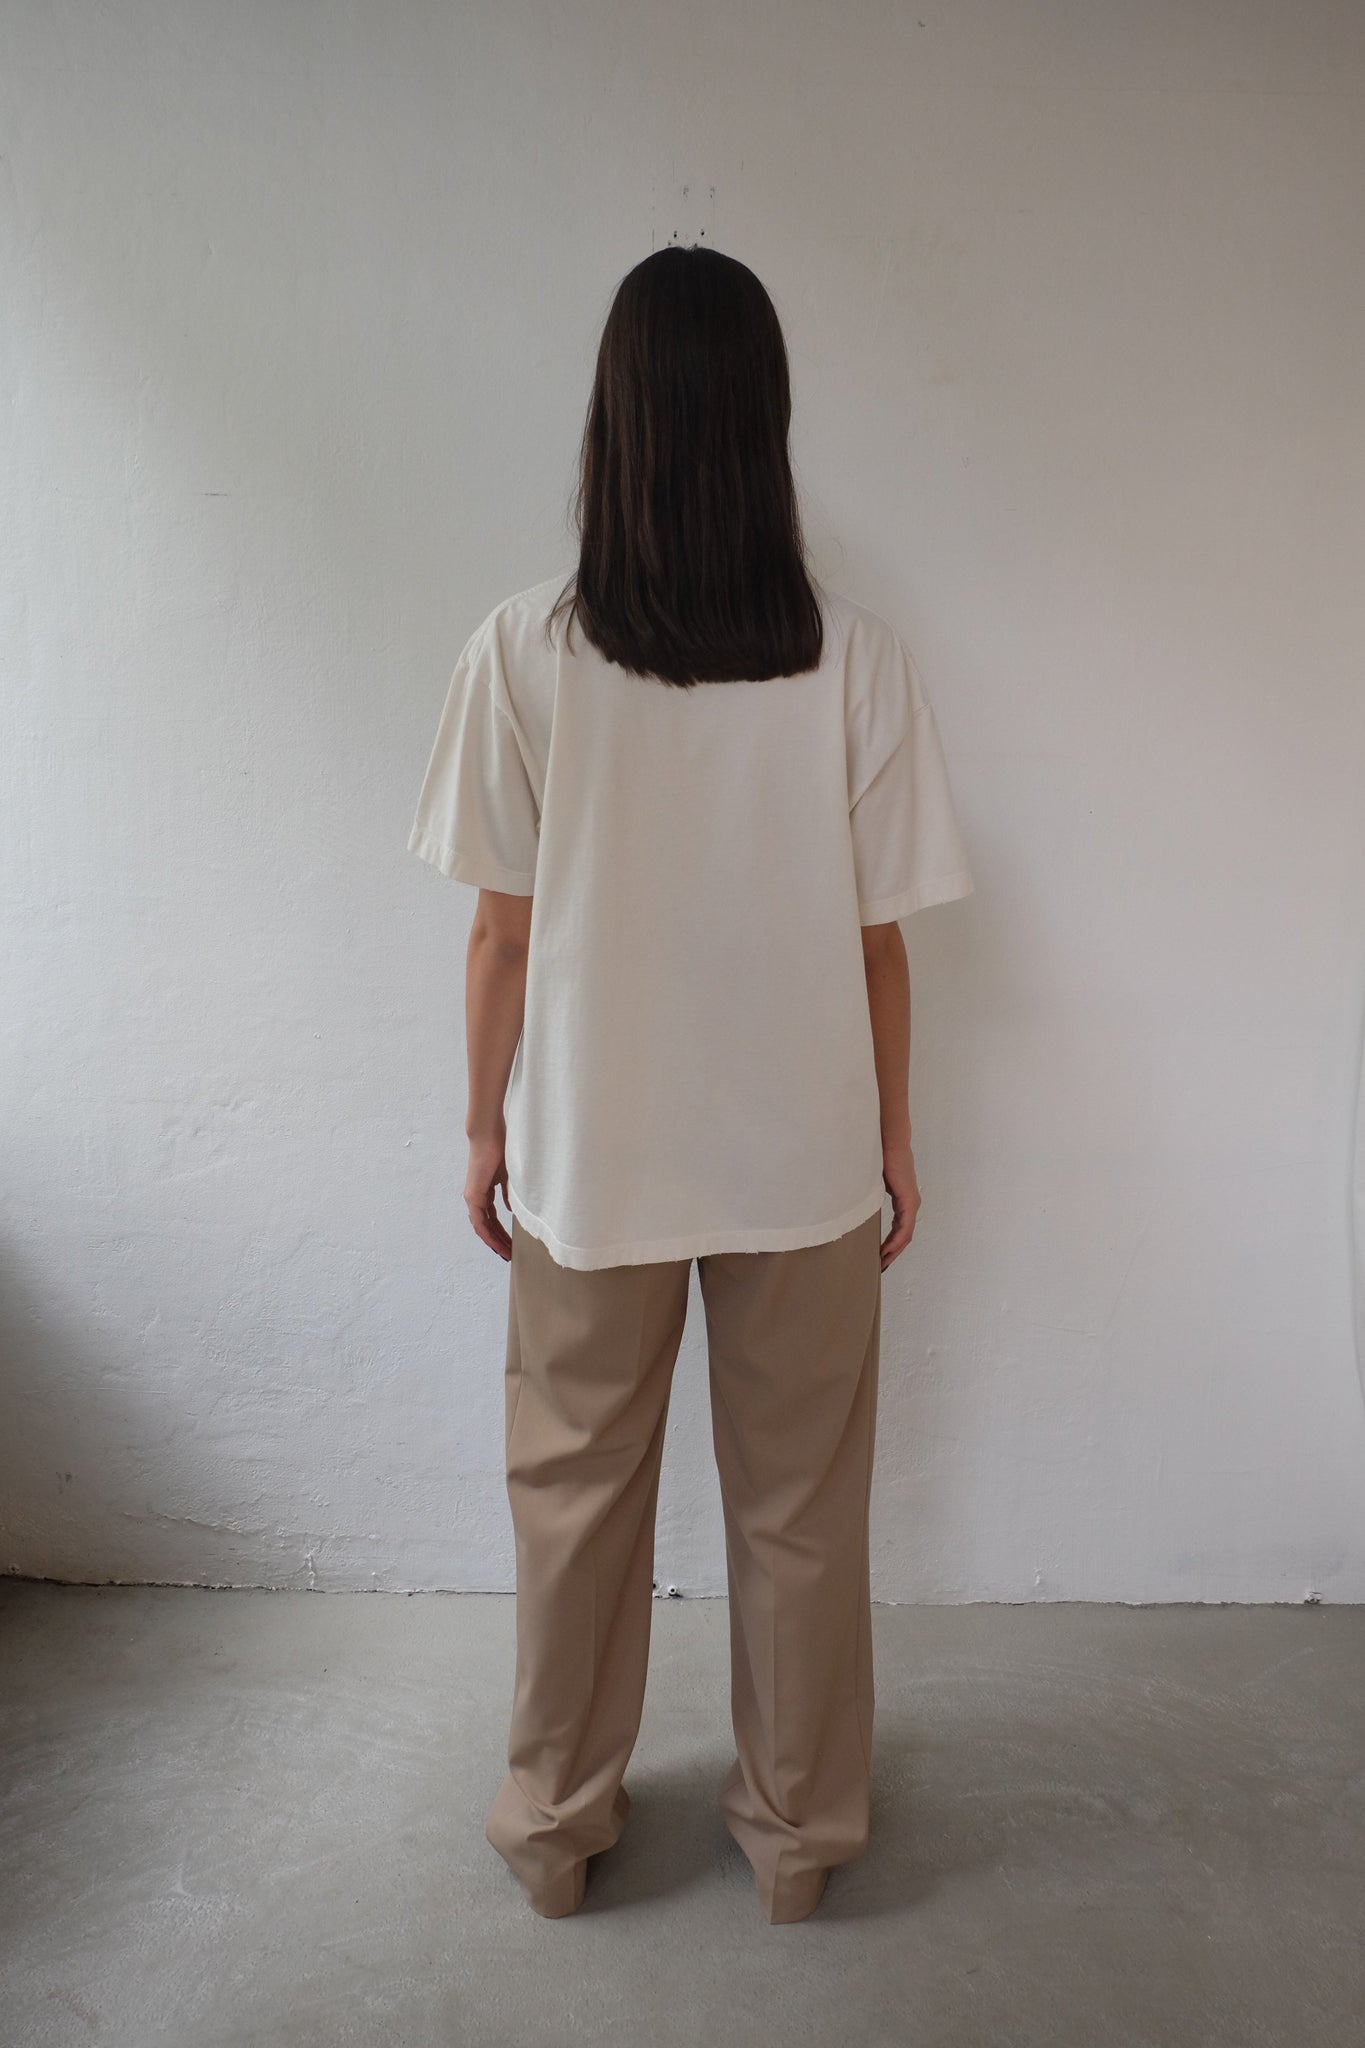 HOPE HEAVY COTTON UNISEX SHIRT IN OFF WHITE - BEYOND STUDIOS